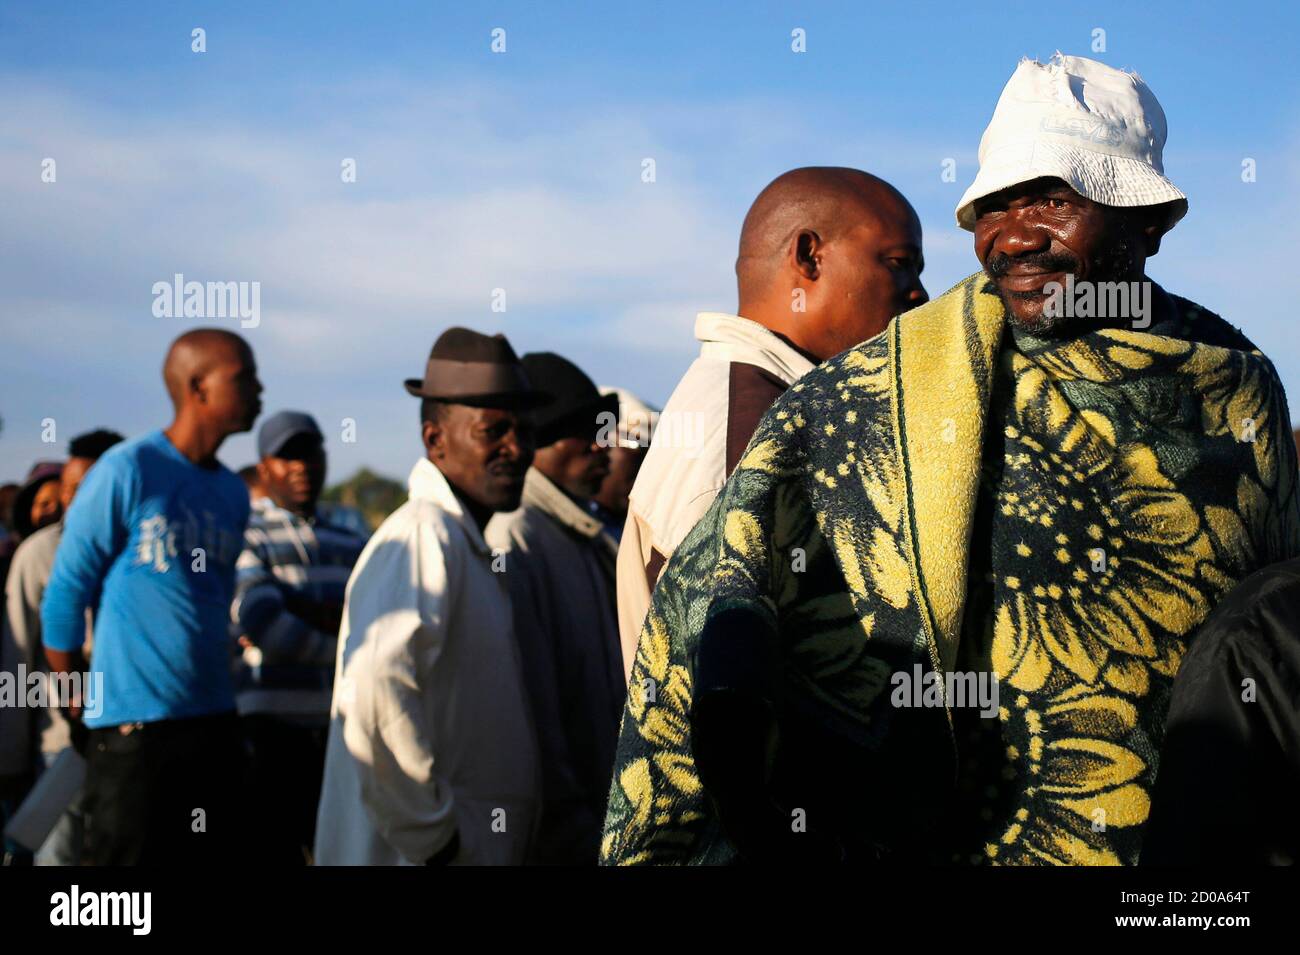 Locals wait to cast their votes during Lesotho's national elections in Magkhoakhoeng village, outside the capital Maseru, February 28, 2015. Feuding parties in Lesotho's ruling coalition will face off on Saturday in early national elections staged in a bid to restore stability six months after an attempted coup.The vote is being held about two years ahead of schedule under a political deal brokered by South Africa, which surrounds the mountainous kingdom. REUTERS/Siphiwe Sibeko (LESOTHO - Tags: POLITICS ELECTIONS) Stock Photo